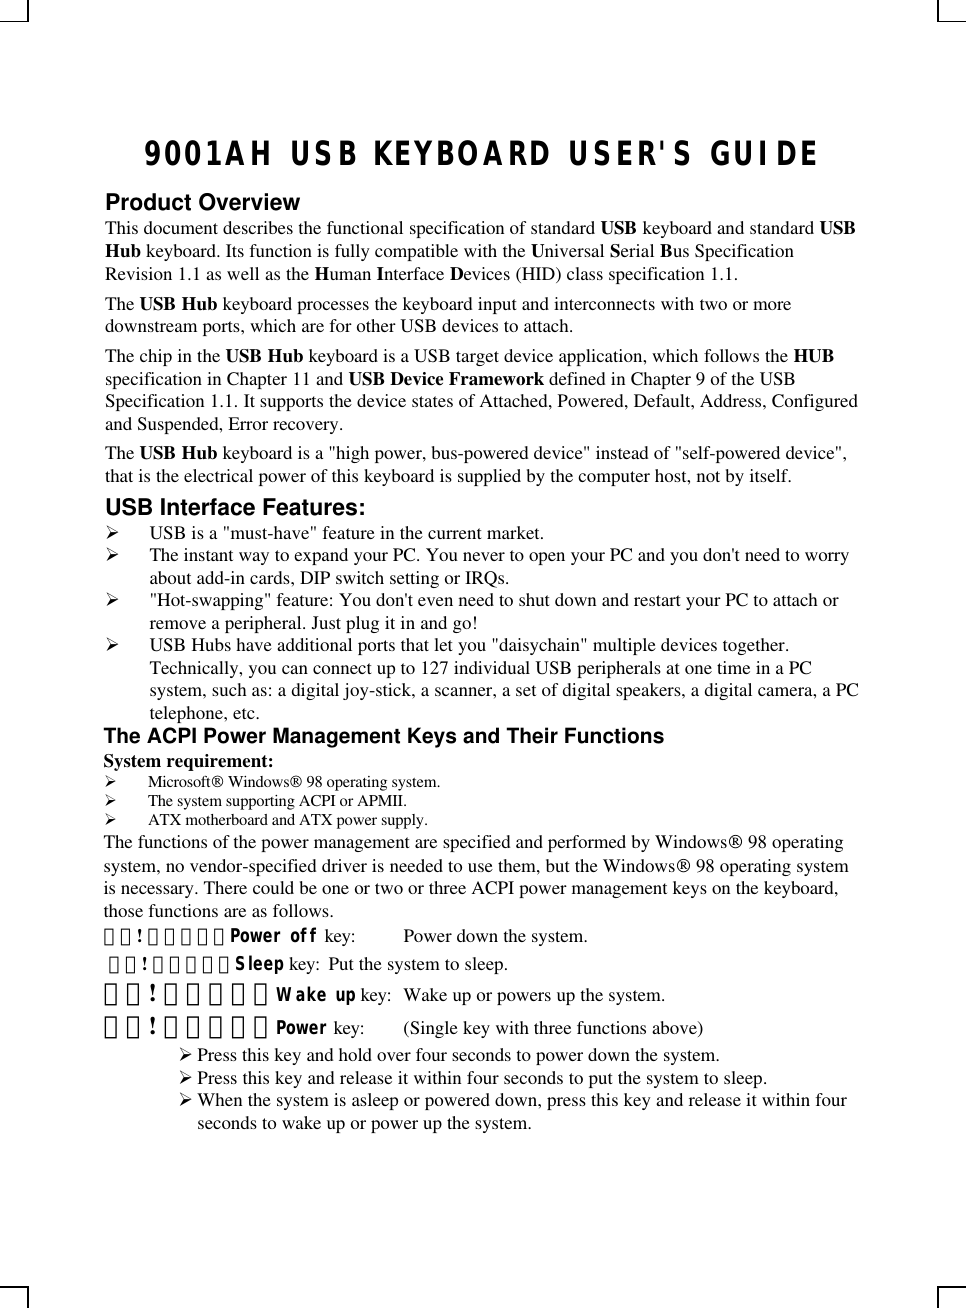 9001AH USB KEYBOARD USER&apos;S GUIDEProduct OverviewThis document describes the functional specification of standard USB keyboard and standard USBHub keyboard. Its function is fully compatible with the Universal Serial Bus SpecificationRevision 1.1 as well as the Human Interface Devices (HID) class specification 1.1.The USB Hub keyboard processes the keyboard input and interconnects with two or moredownstream ports, which are for other USB devices to attach.The chip in the USB Hub keyboard is a USB target device application, which follows the HUBspecification in Chapter 11 and USB Device Framework defined in Chapter 9 of the USBSpecification 1.1. It supports the device states of Attached, Powered, Default, Address, Configuredand Suspended, Error recovery.The USB Hub keyboard is a &quot;high power, bus-powered device&quot; instead of &quot;self-powered device&quot;,that is the electrical power of this keyboard is supplied by the computer host, not by itself.USB Interface Features:Ø USB is a &quot;must-have&quot; feature in the current market.Ø The instant way to expand your PC. You never to open your PC and you don&apos;t need to worryabout add-in cards, DIP switch setting or IRQs.Ø &quot;Hot-swapping&quot; feature: You don&apos;t even need to shut down and restart your PC to attach orremove a peripheral. Just plug it in and go!Ø USB Hubs have additional ports that let you &quot;daisychain&quot; multiple devices together.Technically, you can connect up to 127 individual USB peripherals at one time in a PCsystem, such as: a digital joy-stick, a scanner, a set of digital speakers, a digital camera, a PCtelephone, etc.The ACPI Power Management Keys and Their FunctionsSystem requirement:Ø Microsoft Windows 98 operating system.Ø The system supporting ACPI or APMII.Ø ATX motherboard and ATX power supply.The functions of the power management are specified and performed by Windows 98 operatingsystem, no vendor-specified driver is needed to use them, but the Windows 98 operating systemis necessary. There could be one or two or three ACPI power management keys on the keyboard,those functions are as follows.錯誤! 連結無效。Power off key: Power down the system. 錯誤! 連結無效。Sleep key: Put the system to sleep.錯誤! 連結無效。Wake up key: Wake up or powers up the system.錯誤! 連結無效。Power key: (Single key with three functions above)Ø Press this key and hold over four seconds to power down the system.Ø Press this key and release it within four seconds to put the system to sleep.Ø When the system is asleep or powered down, press this key and release it within fourseconds to wake up or power up the system.